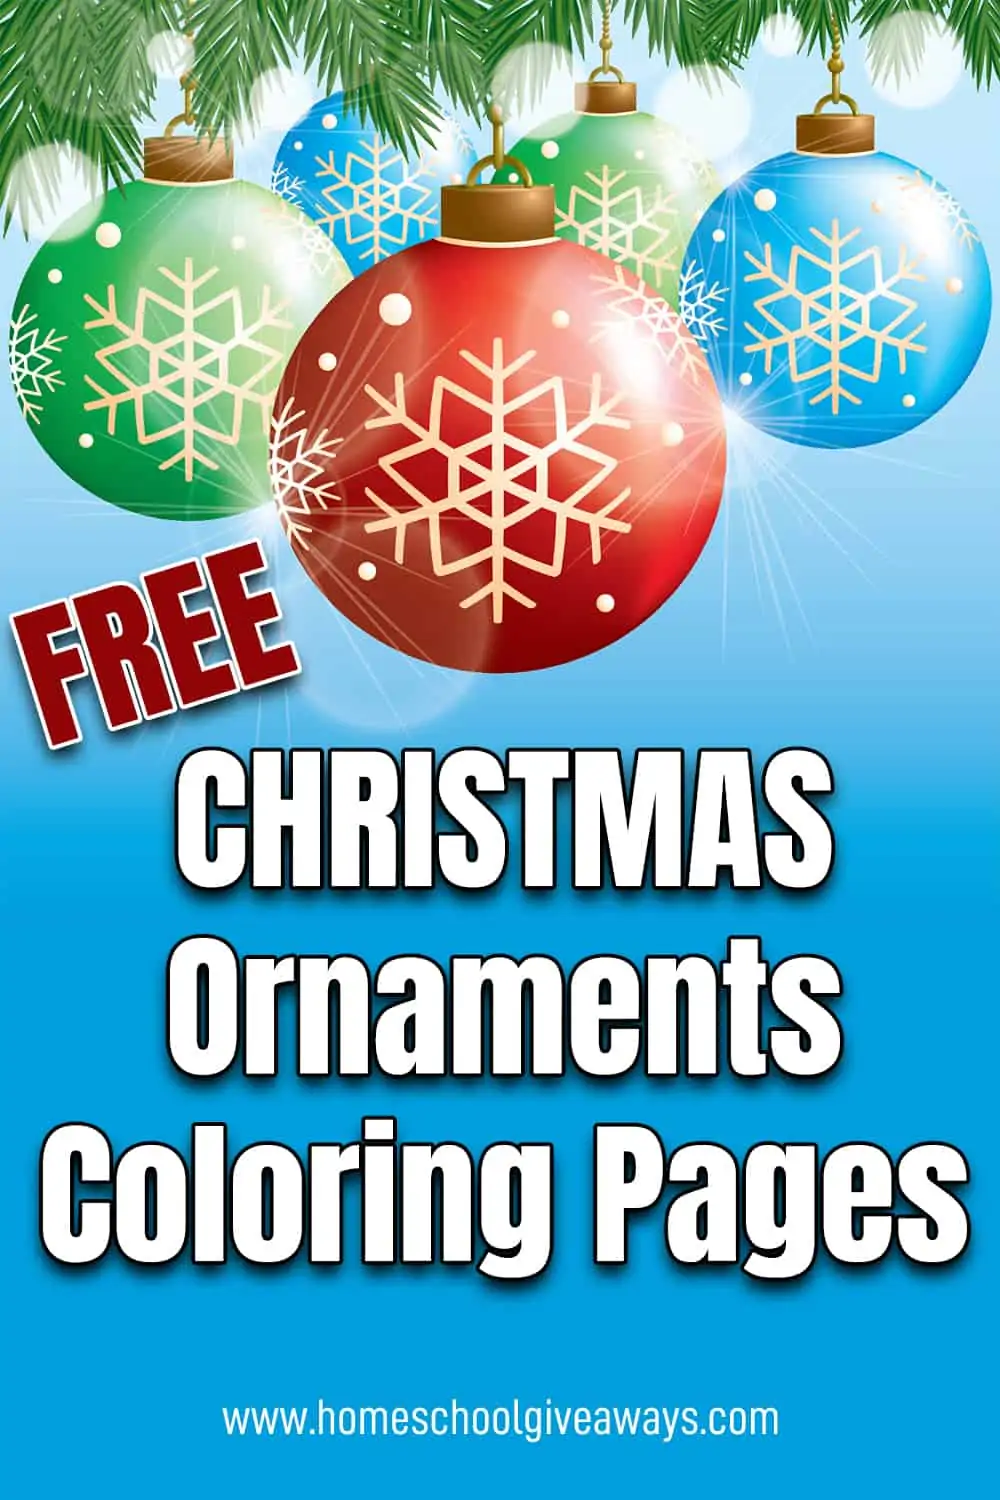 five different colored illustrated round Christmas ornaments and text Christmas Ornaments Coloring Pages